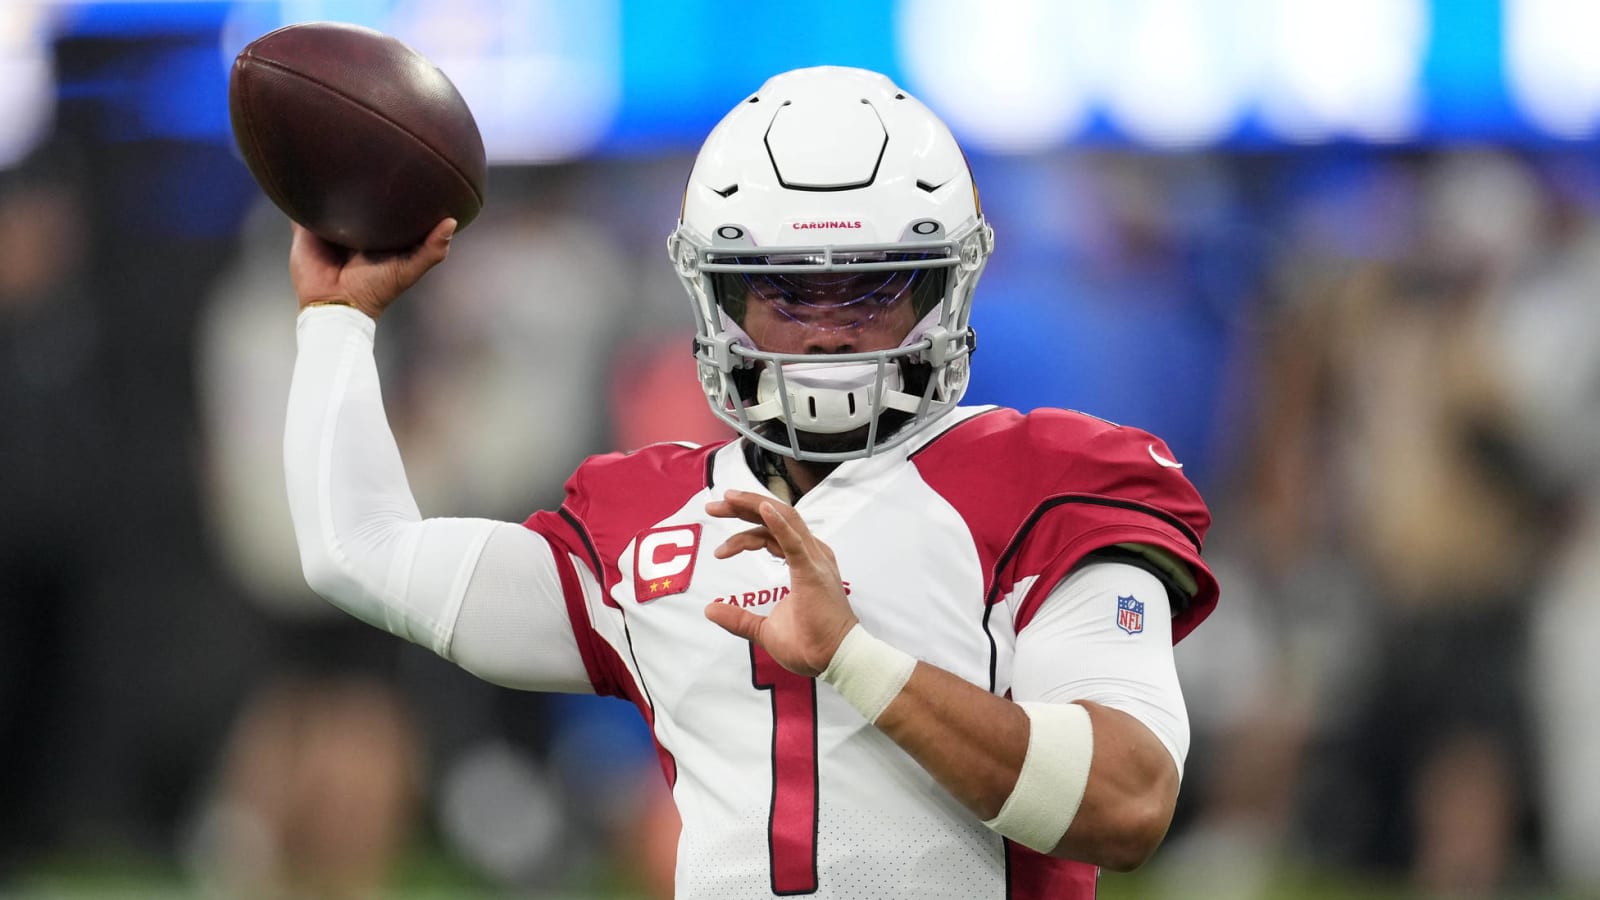 Kyler Murray throws panic pick six to avoid a safety